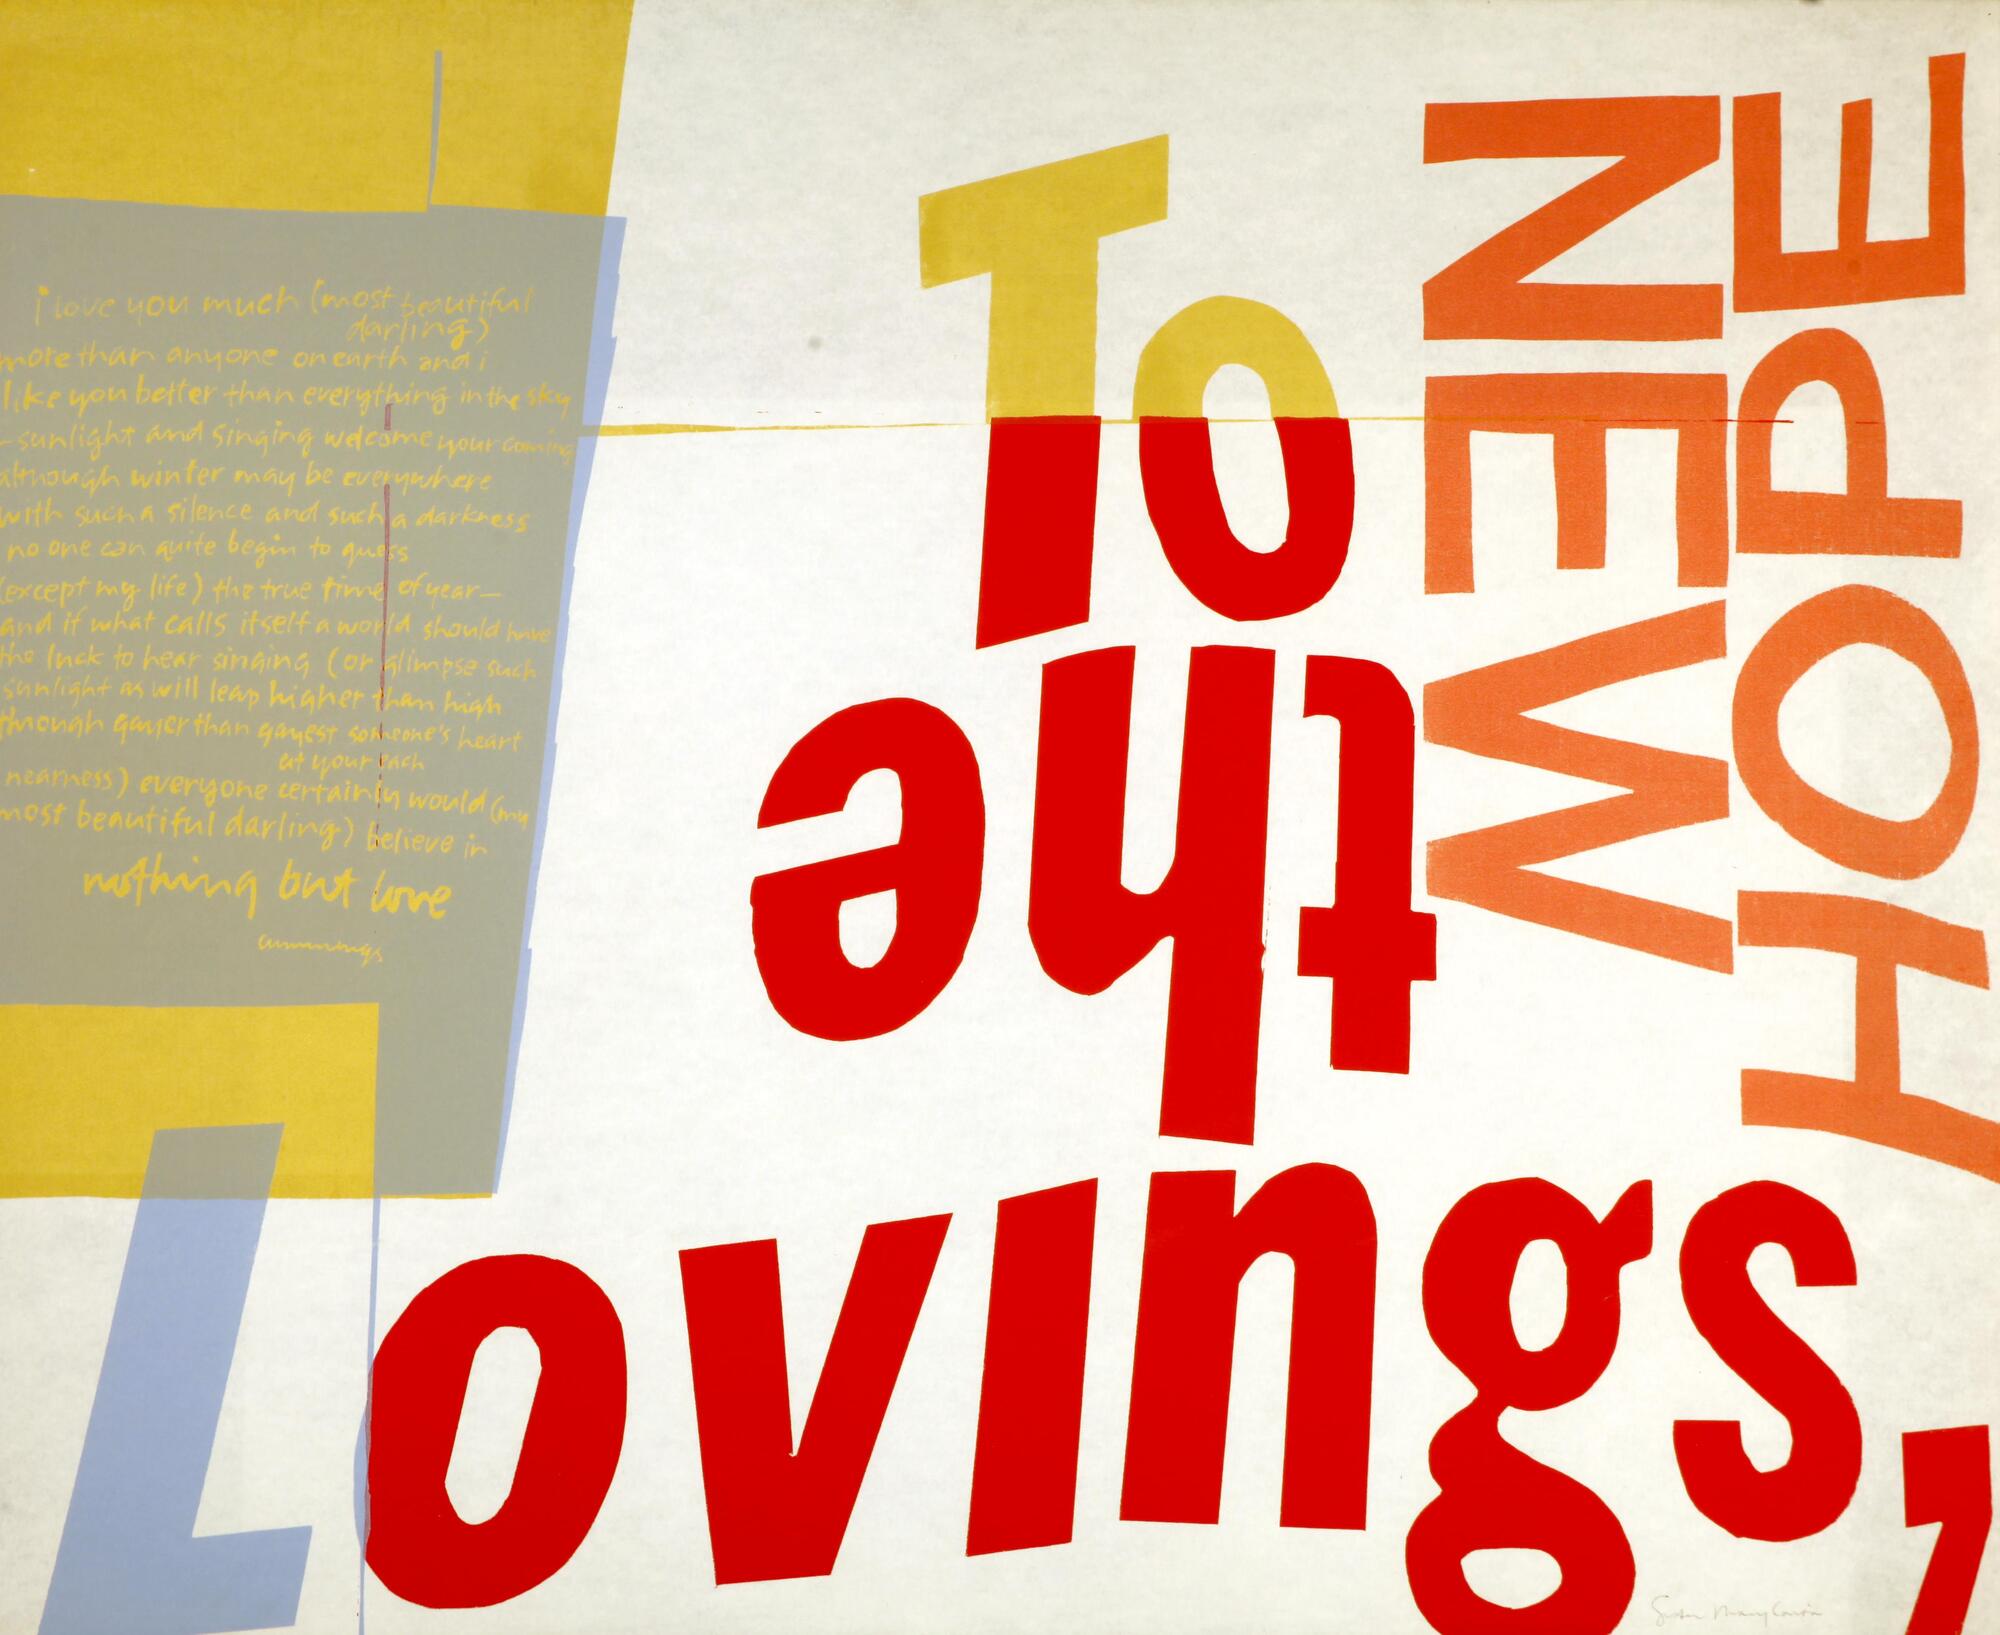 This print is made of colorful forms and words in bright letters and bold fonts, arranged on a white background. Block letters display words in a mixed-up format, some upside down, some on their sides. On left side there is a section with smaller writing in yellowish ink on grey.<br /><br />
Text:<br />
To the Lovings, new hope i love you much (most beautiful darling) more than anyone on earth and i like you better than everything in the sky--sunlight and singing welcome your coming although winter may be everywhere with such a silence and such a darkness no one can quite begin to guess (except my life) the true time of the year-- and if what calls itself a world should have the luck to hear singing (or glimpse such sunlight as will leap higher than high through gayer than gayest someone's heart at your each nearness) everyone certainly would (my most beautiful darling) believe in nothing but love. cummings